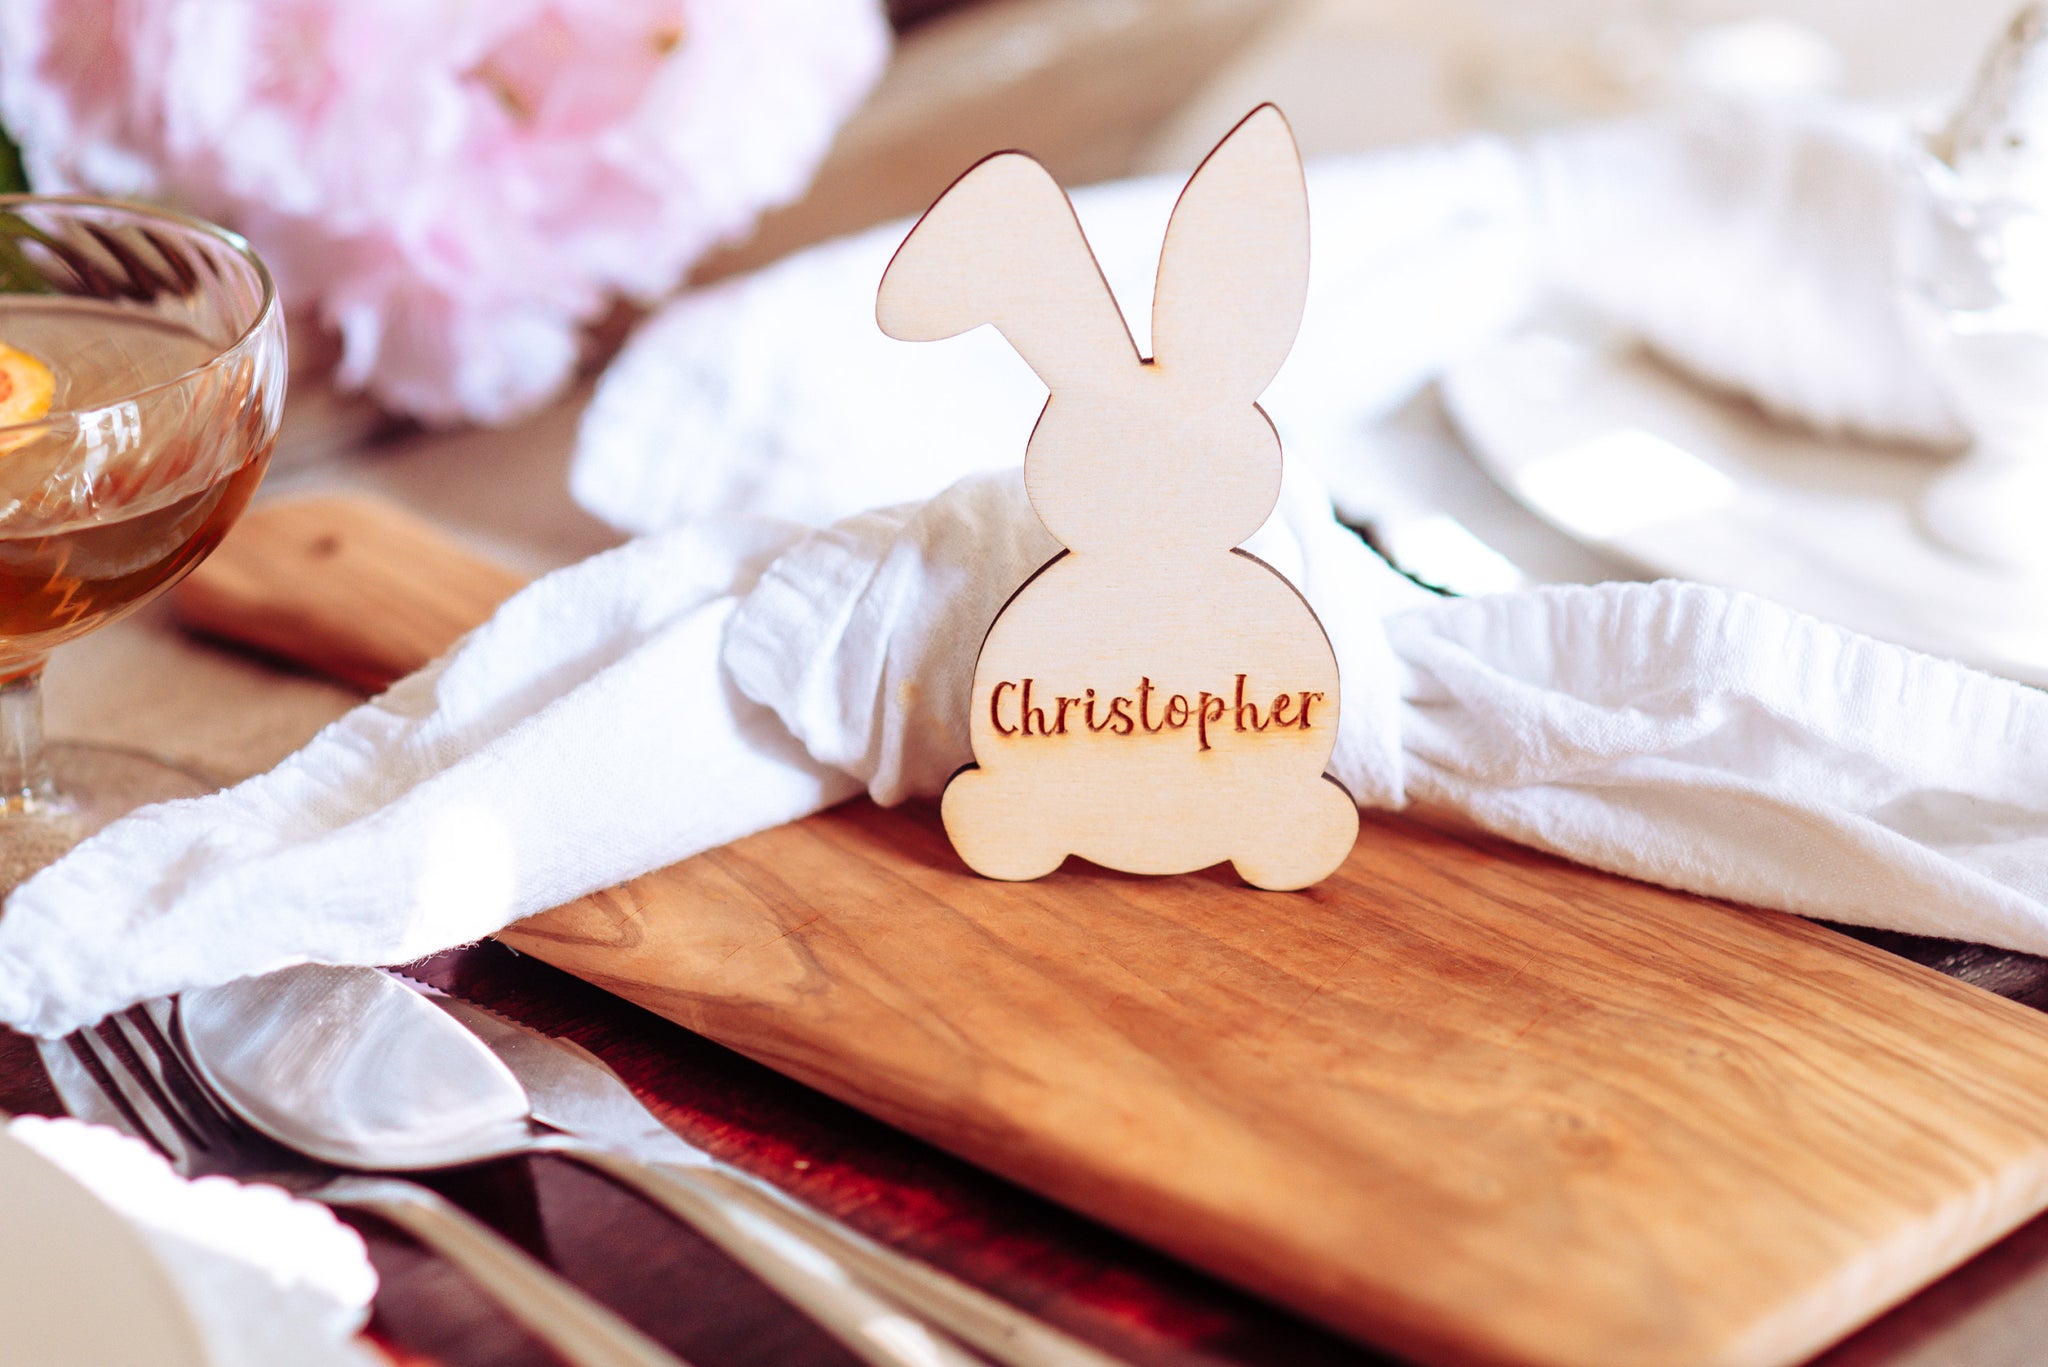 Personalized Bunny Shaped Place Card Combo For Easter Dinner Gathering, Cute Custom Holiday Name Place Holder Card For Holiday Dinner Party